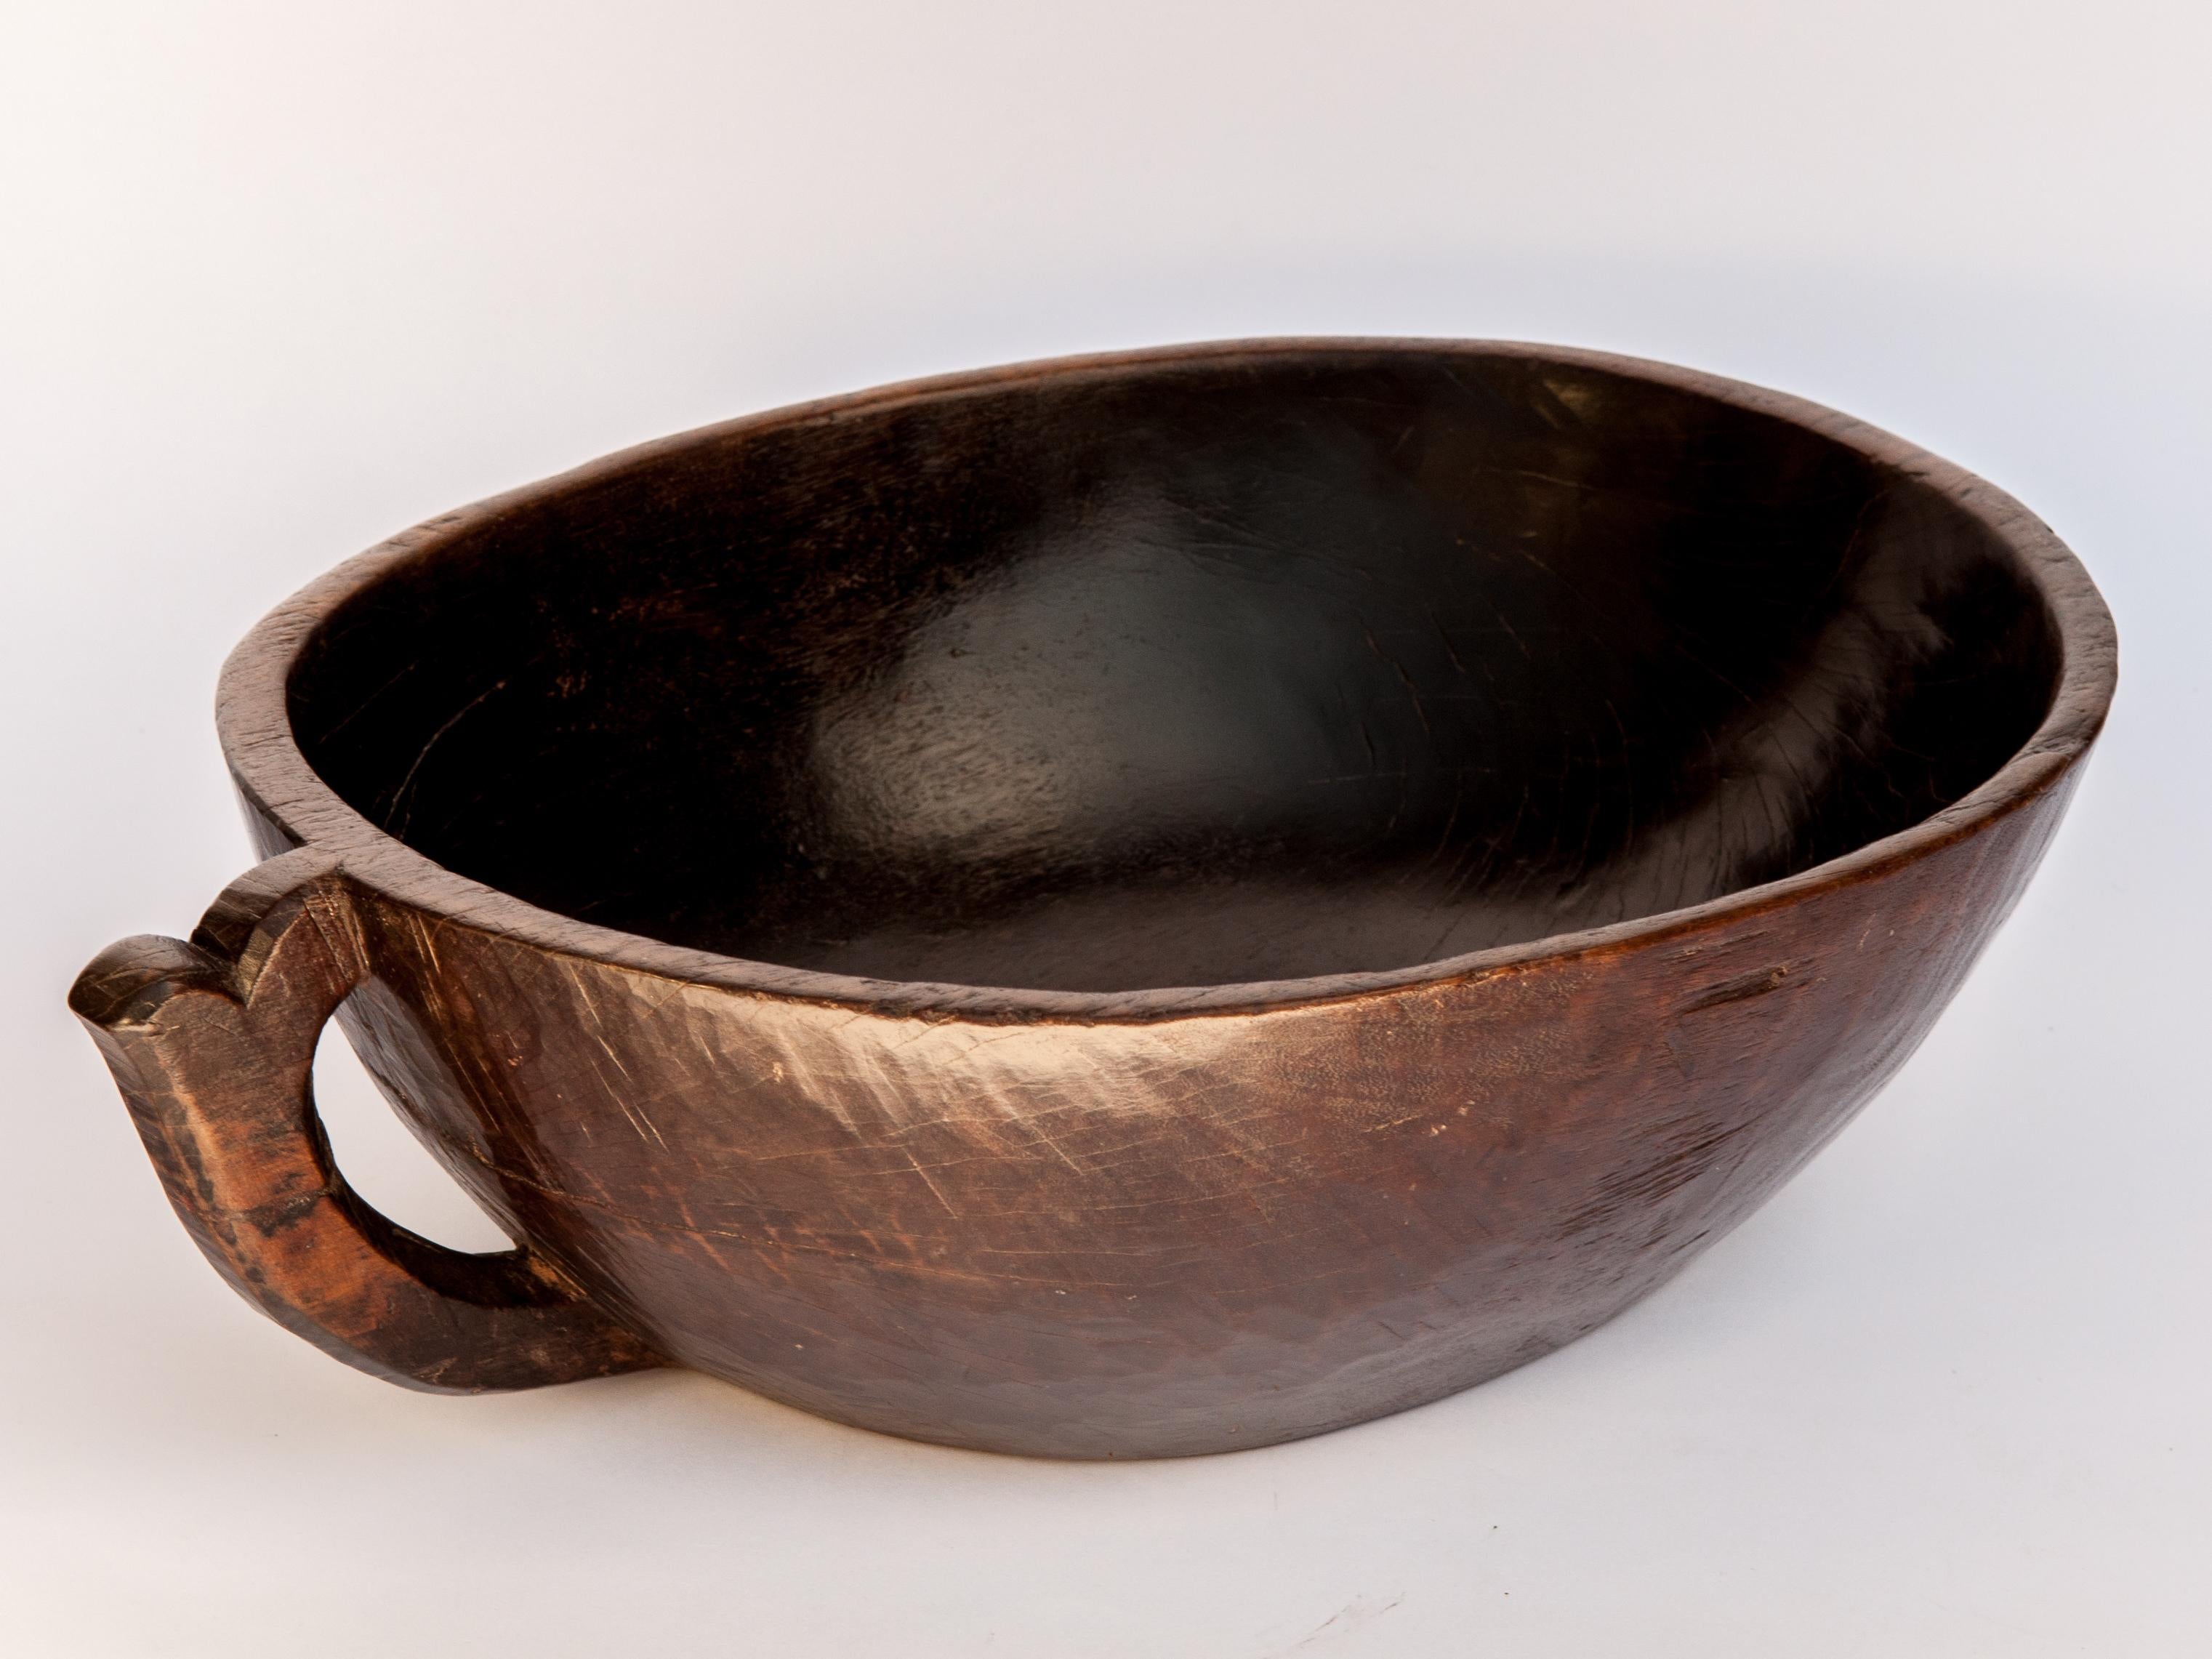 Hardwood Hand Hewn Wooden Bowl with Handle from Sulawesi, Indonesia, Mid-20th Century